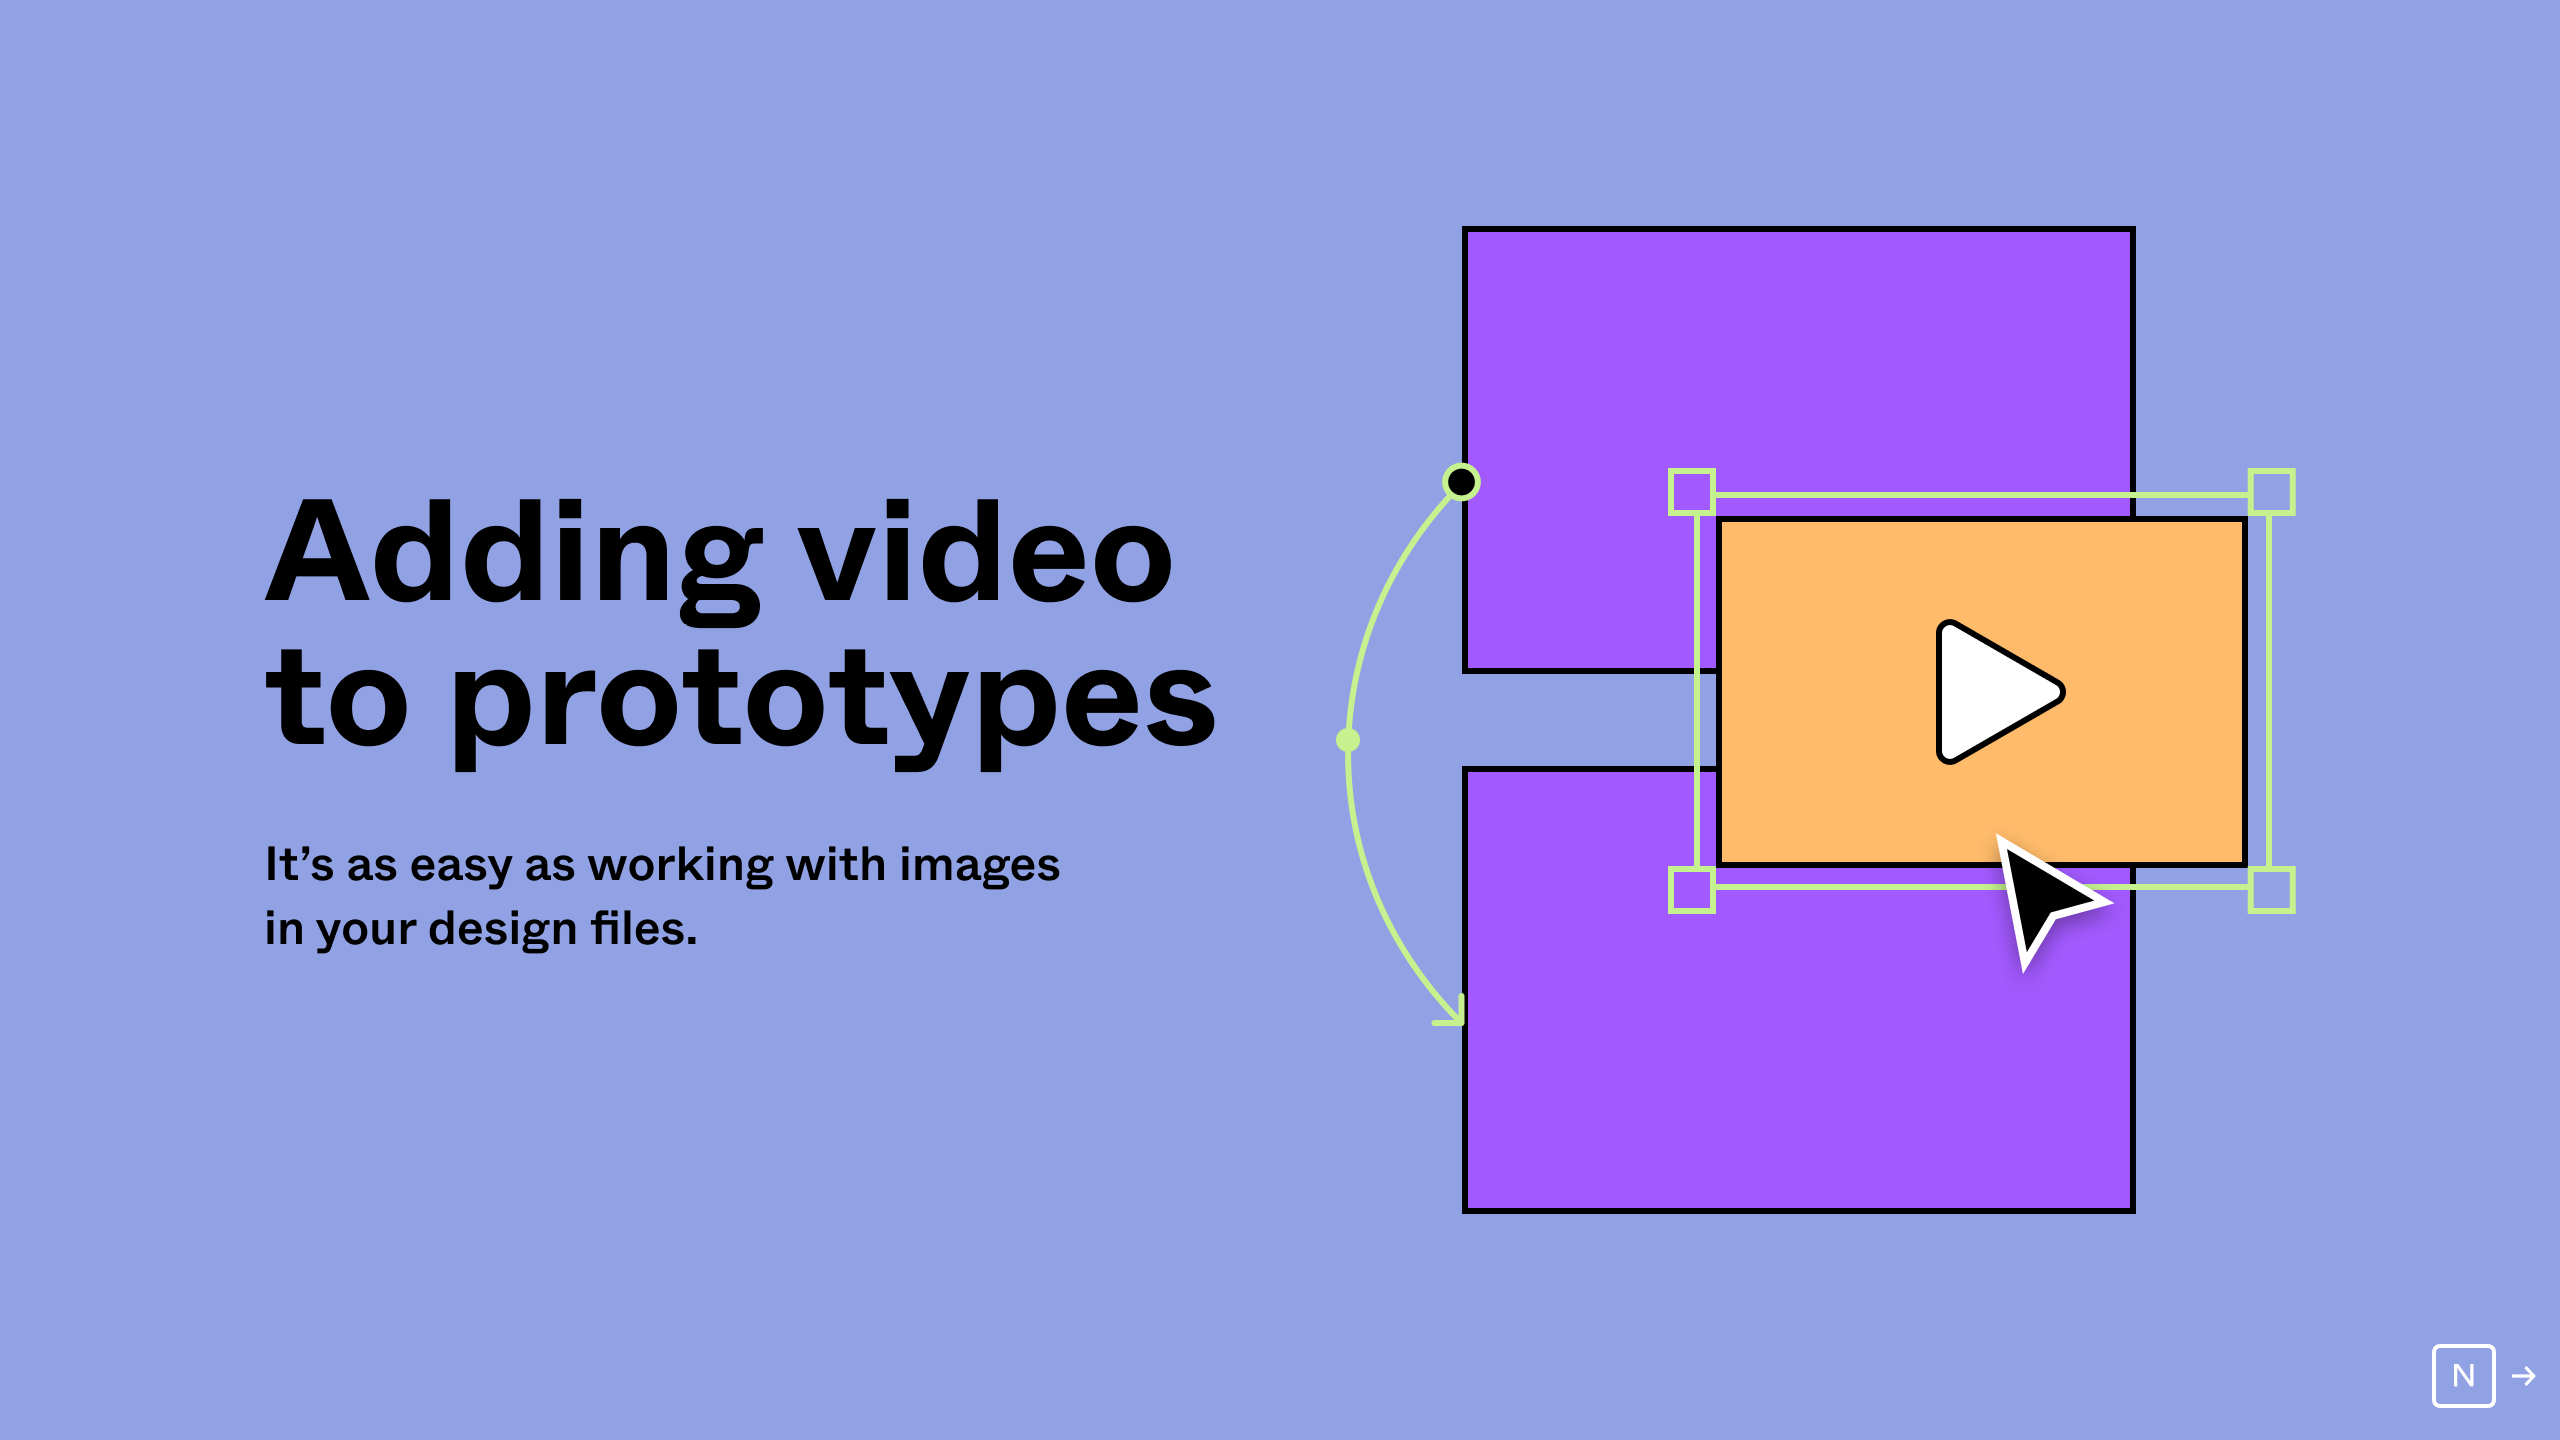 You can now add videos to prototypes in Figma